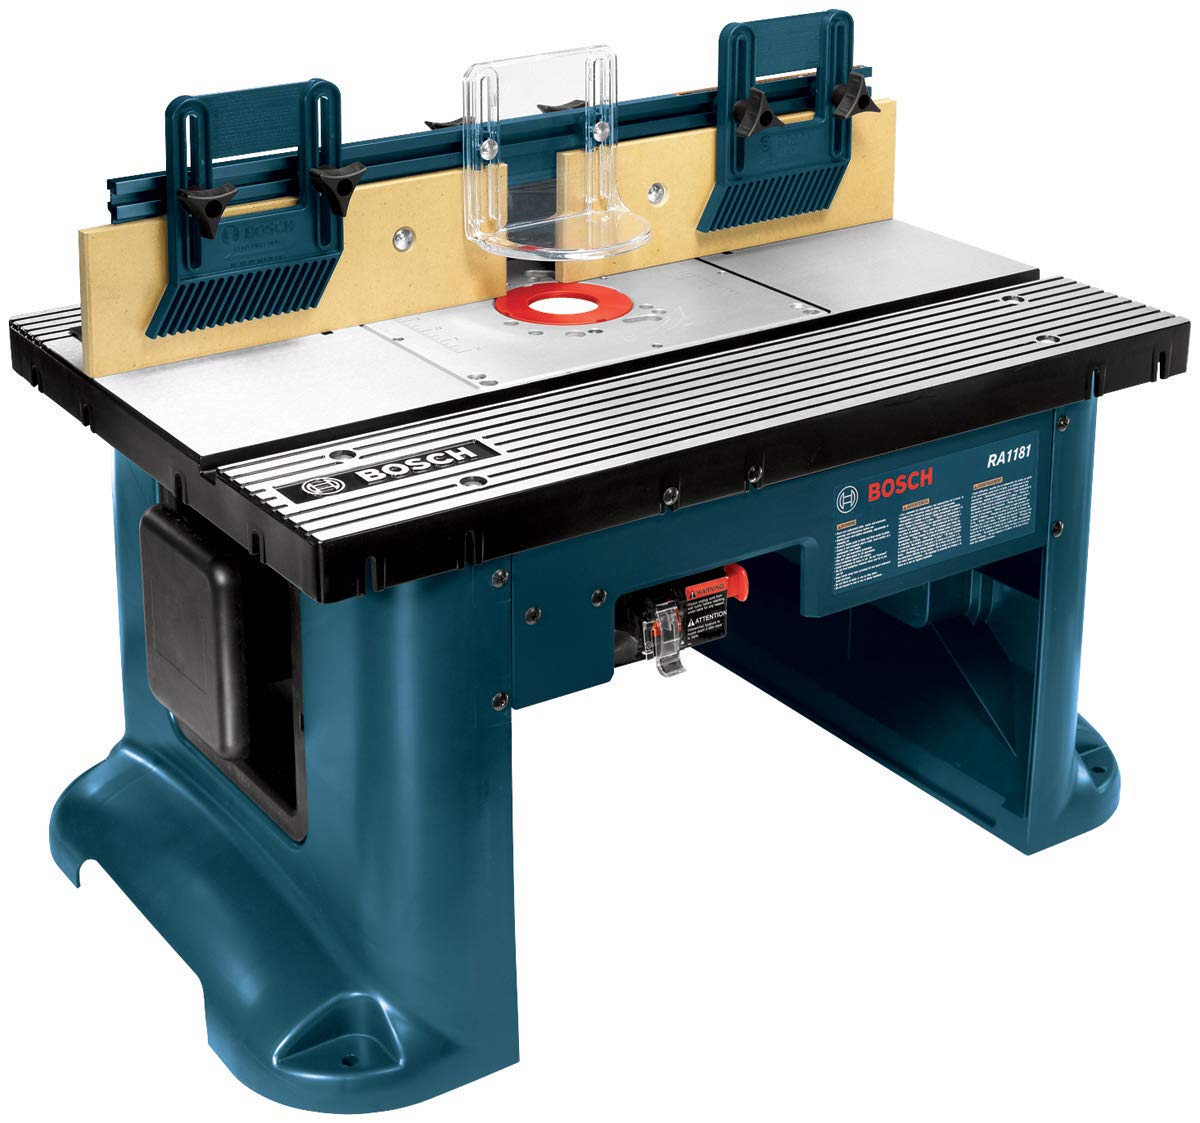 Bosch RA1181 Benchtop Router Table 27 in. x 18 in. Alum...